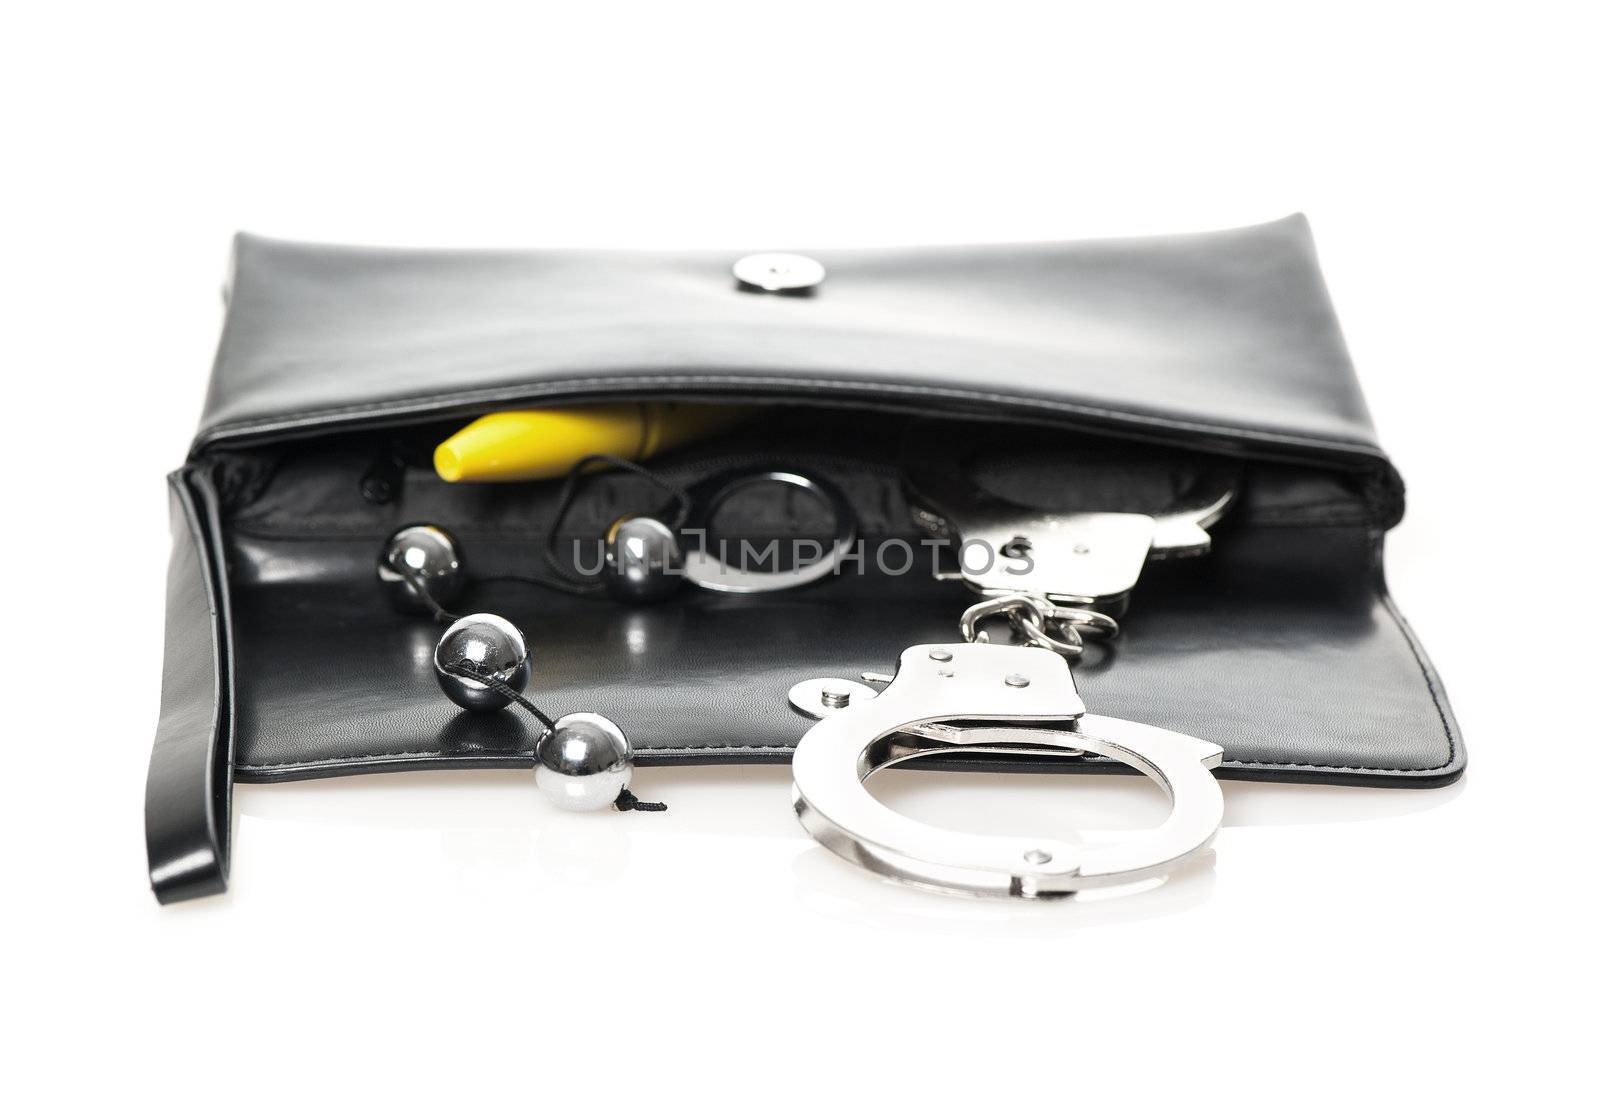 An open black clutch bag/purse with handcuffs, anal beads and a yellow dildo.